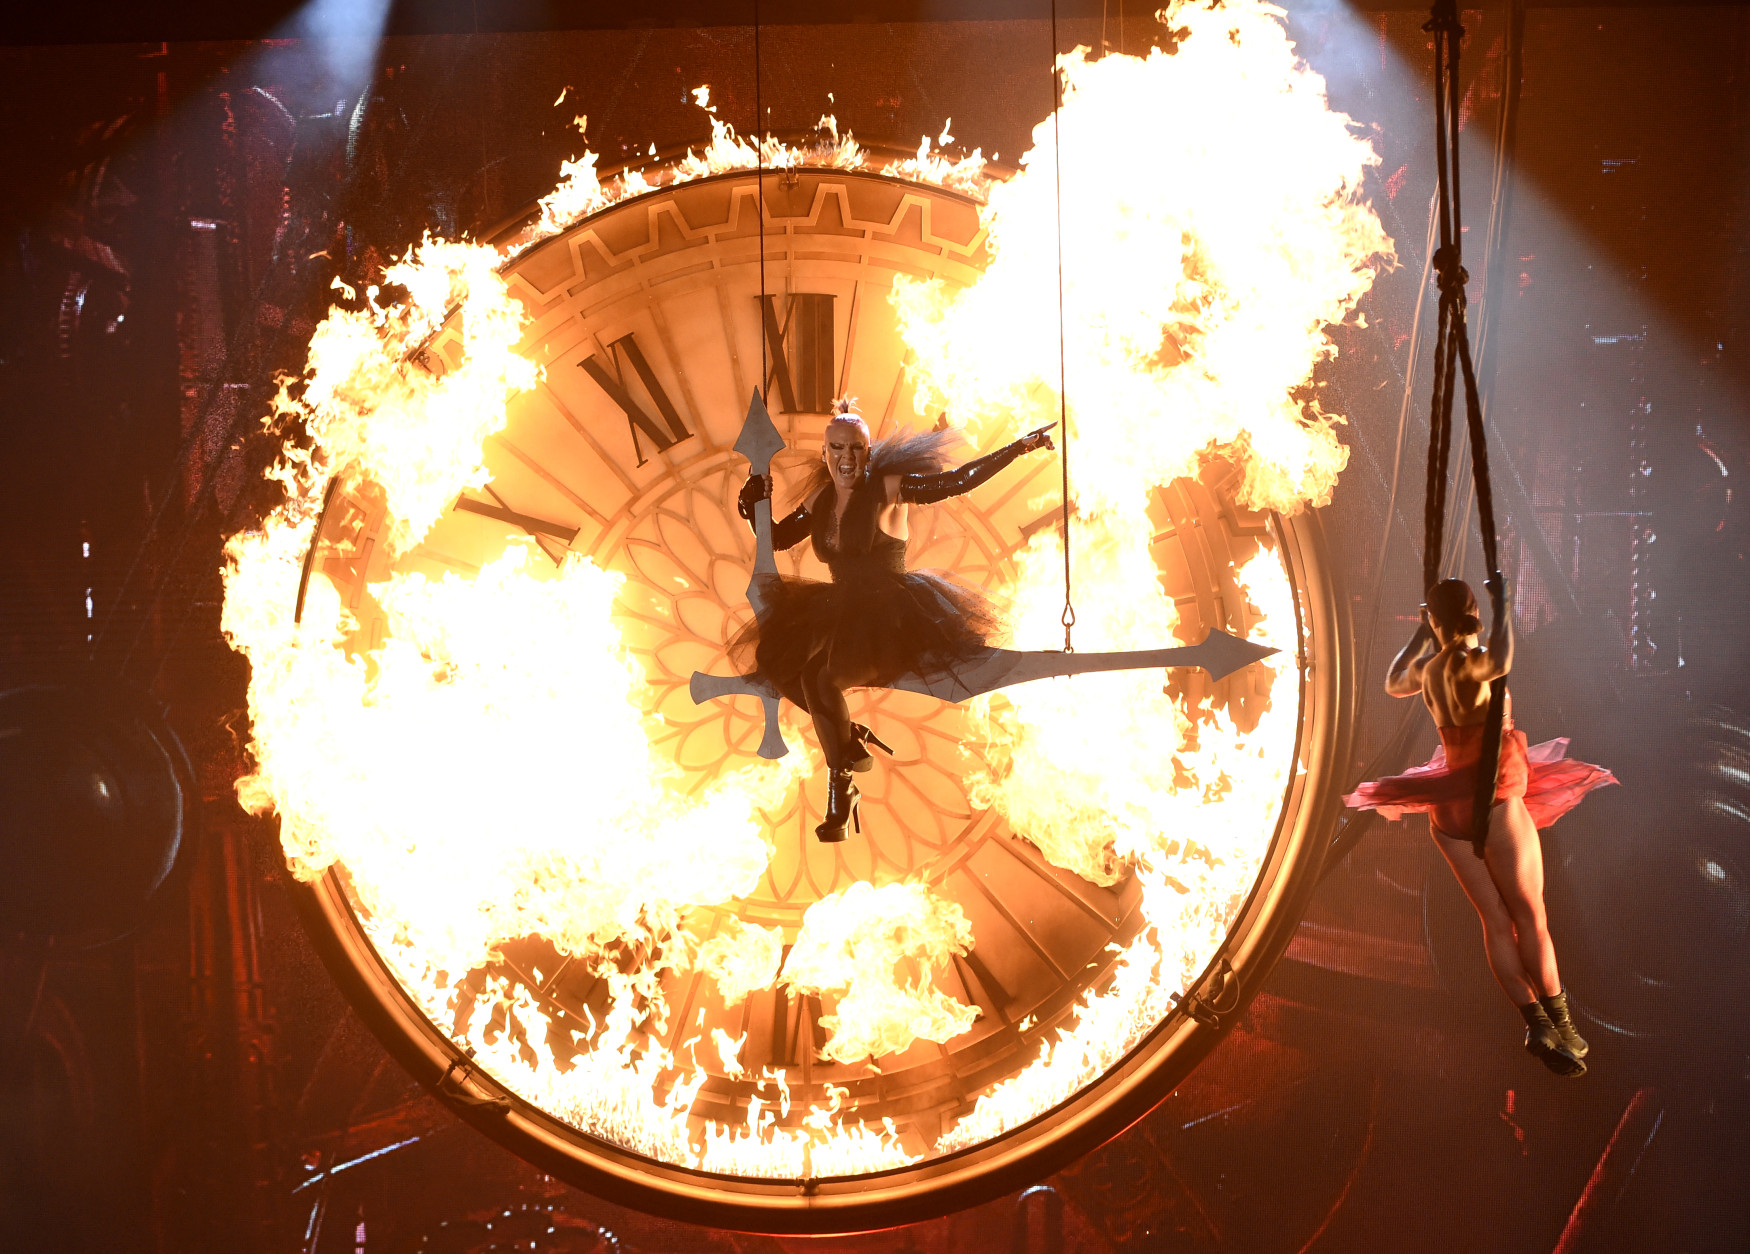 Pink performs Just Like Fire at the Billboard Music Awards at the T-Mobile Arena on Sunday, May 22, 2016, in Las Vegas. (Photo by Chris Pizzello/Invision/AP)